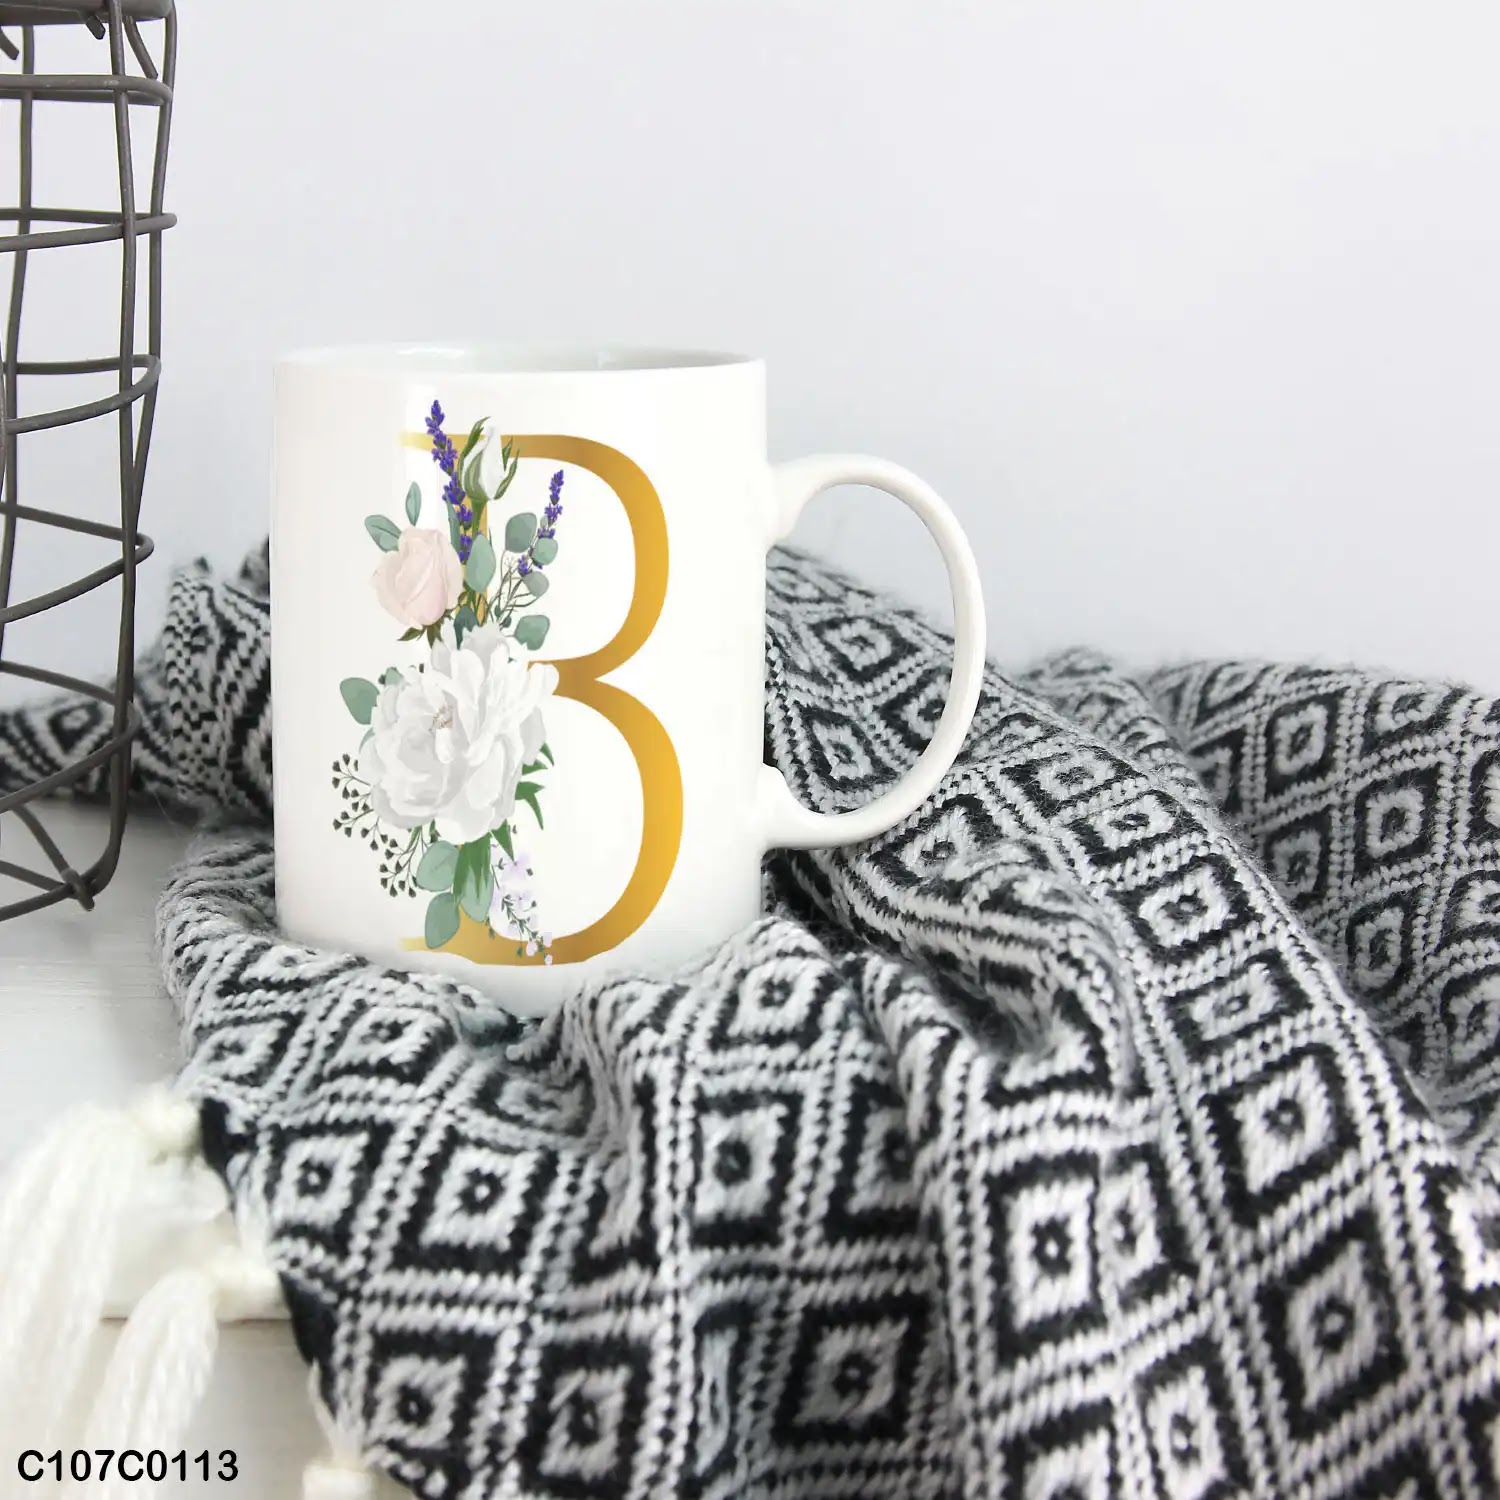 A white mug (cup) printed with gold Letter "B" and small white branch